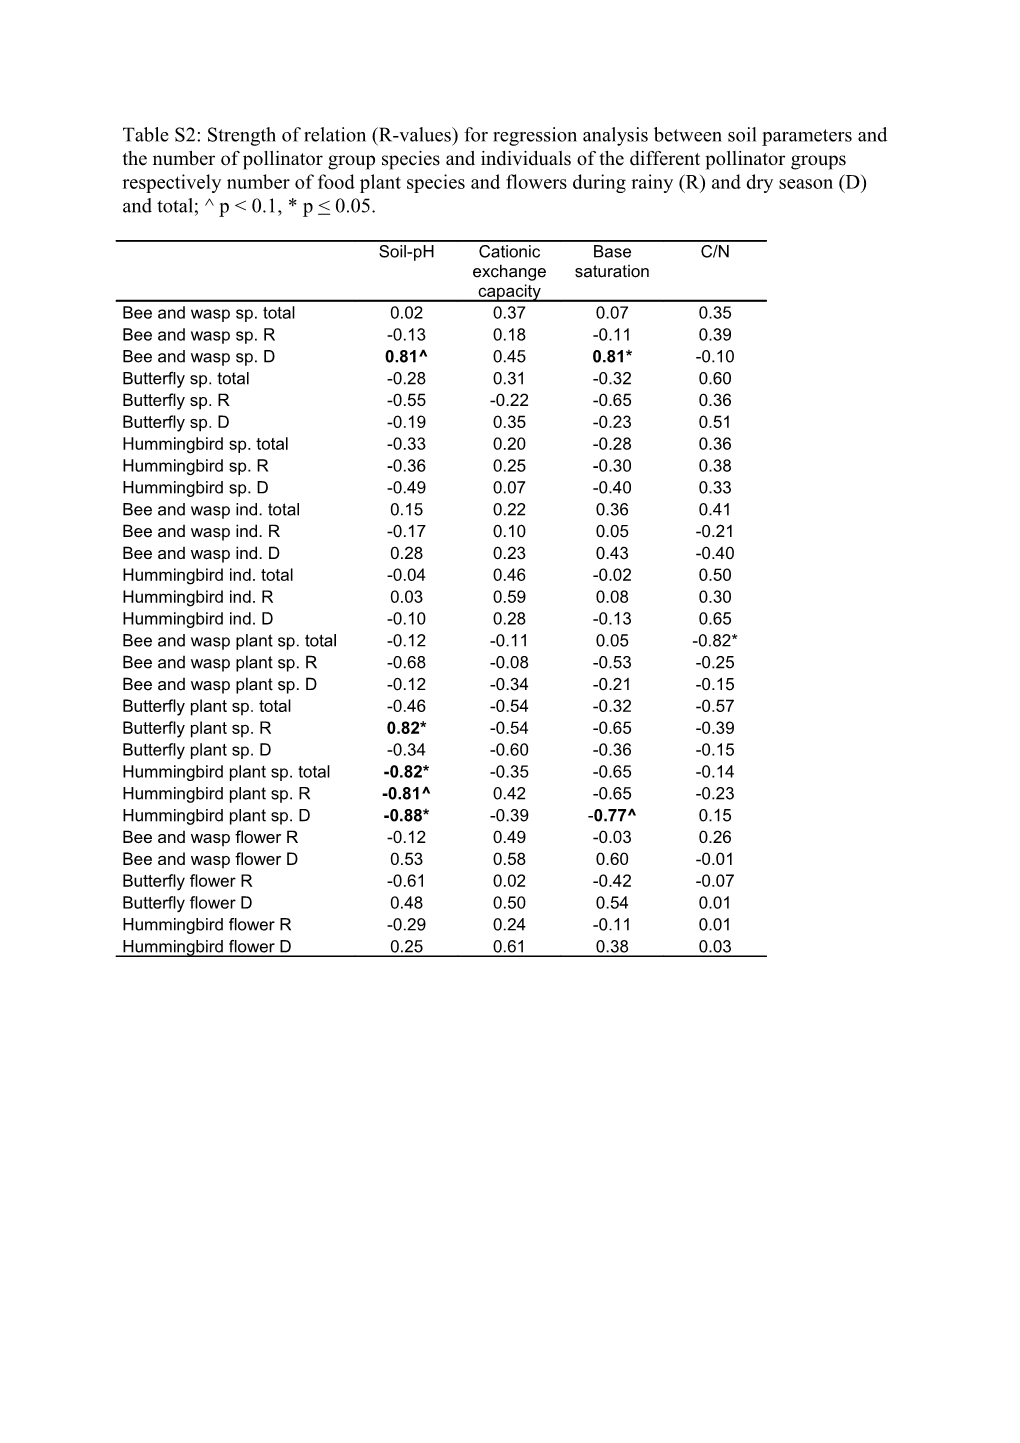 Table S2: Strength of Relation (R-Values) for Regression Analysis Between Soil Parameters